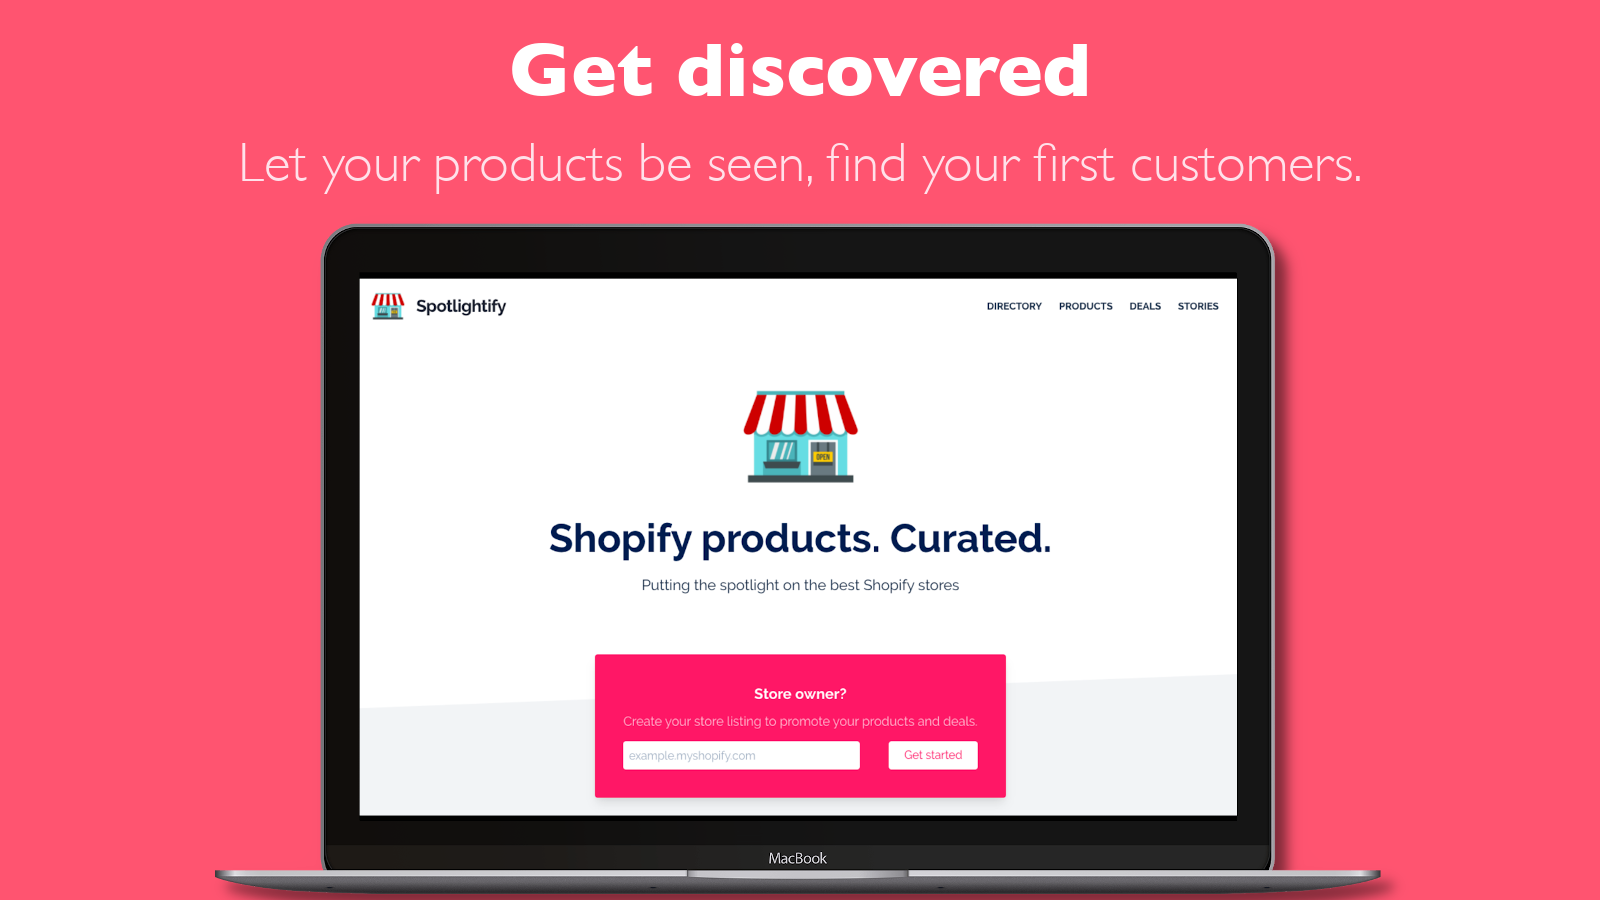 Spotlightify Product Discovery